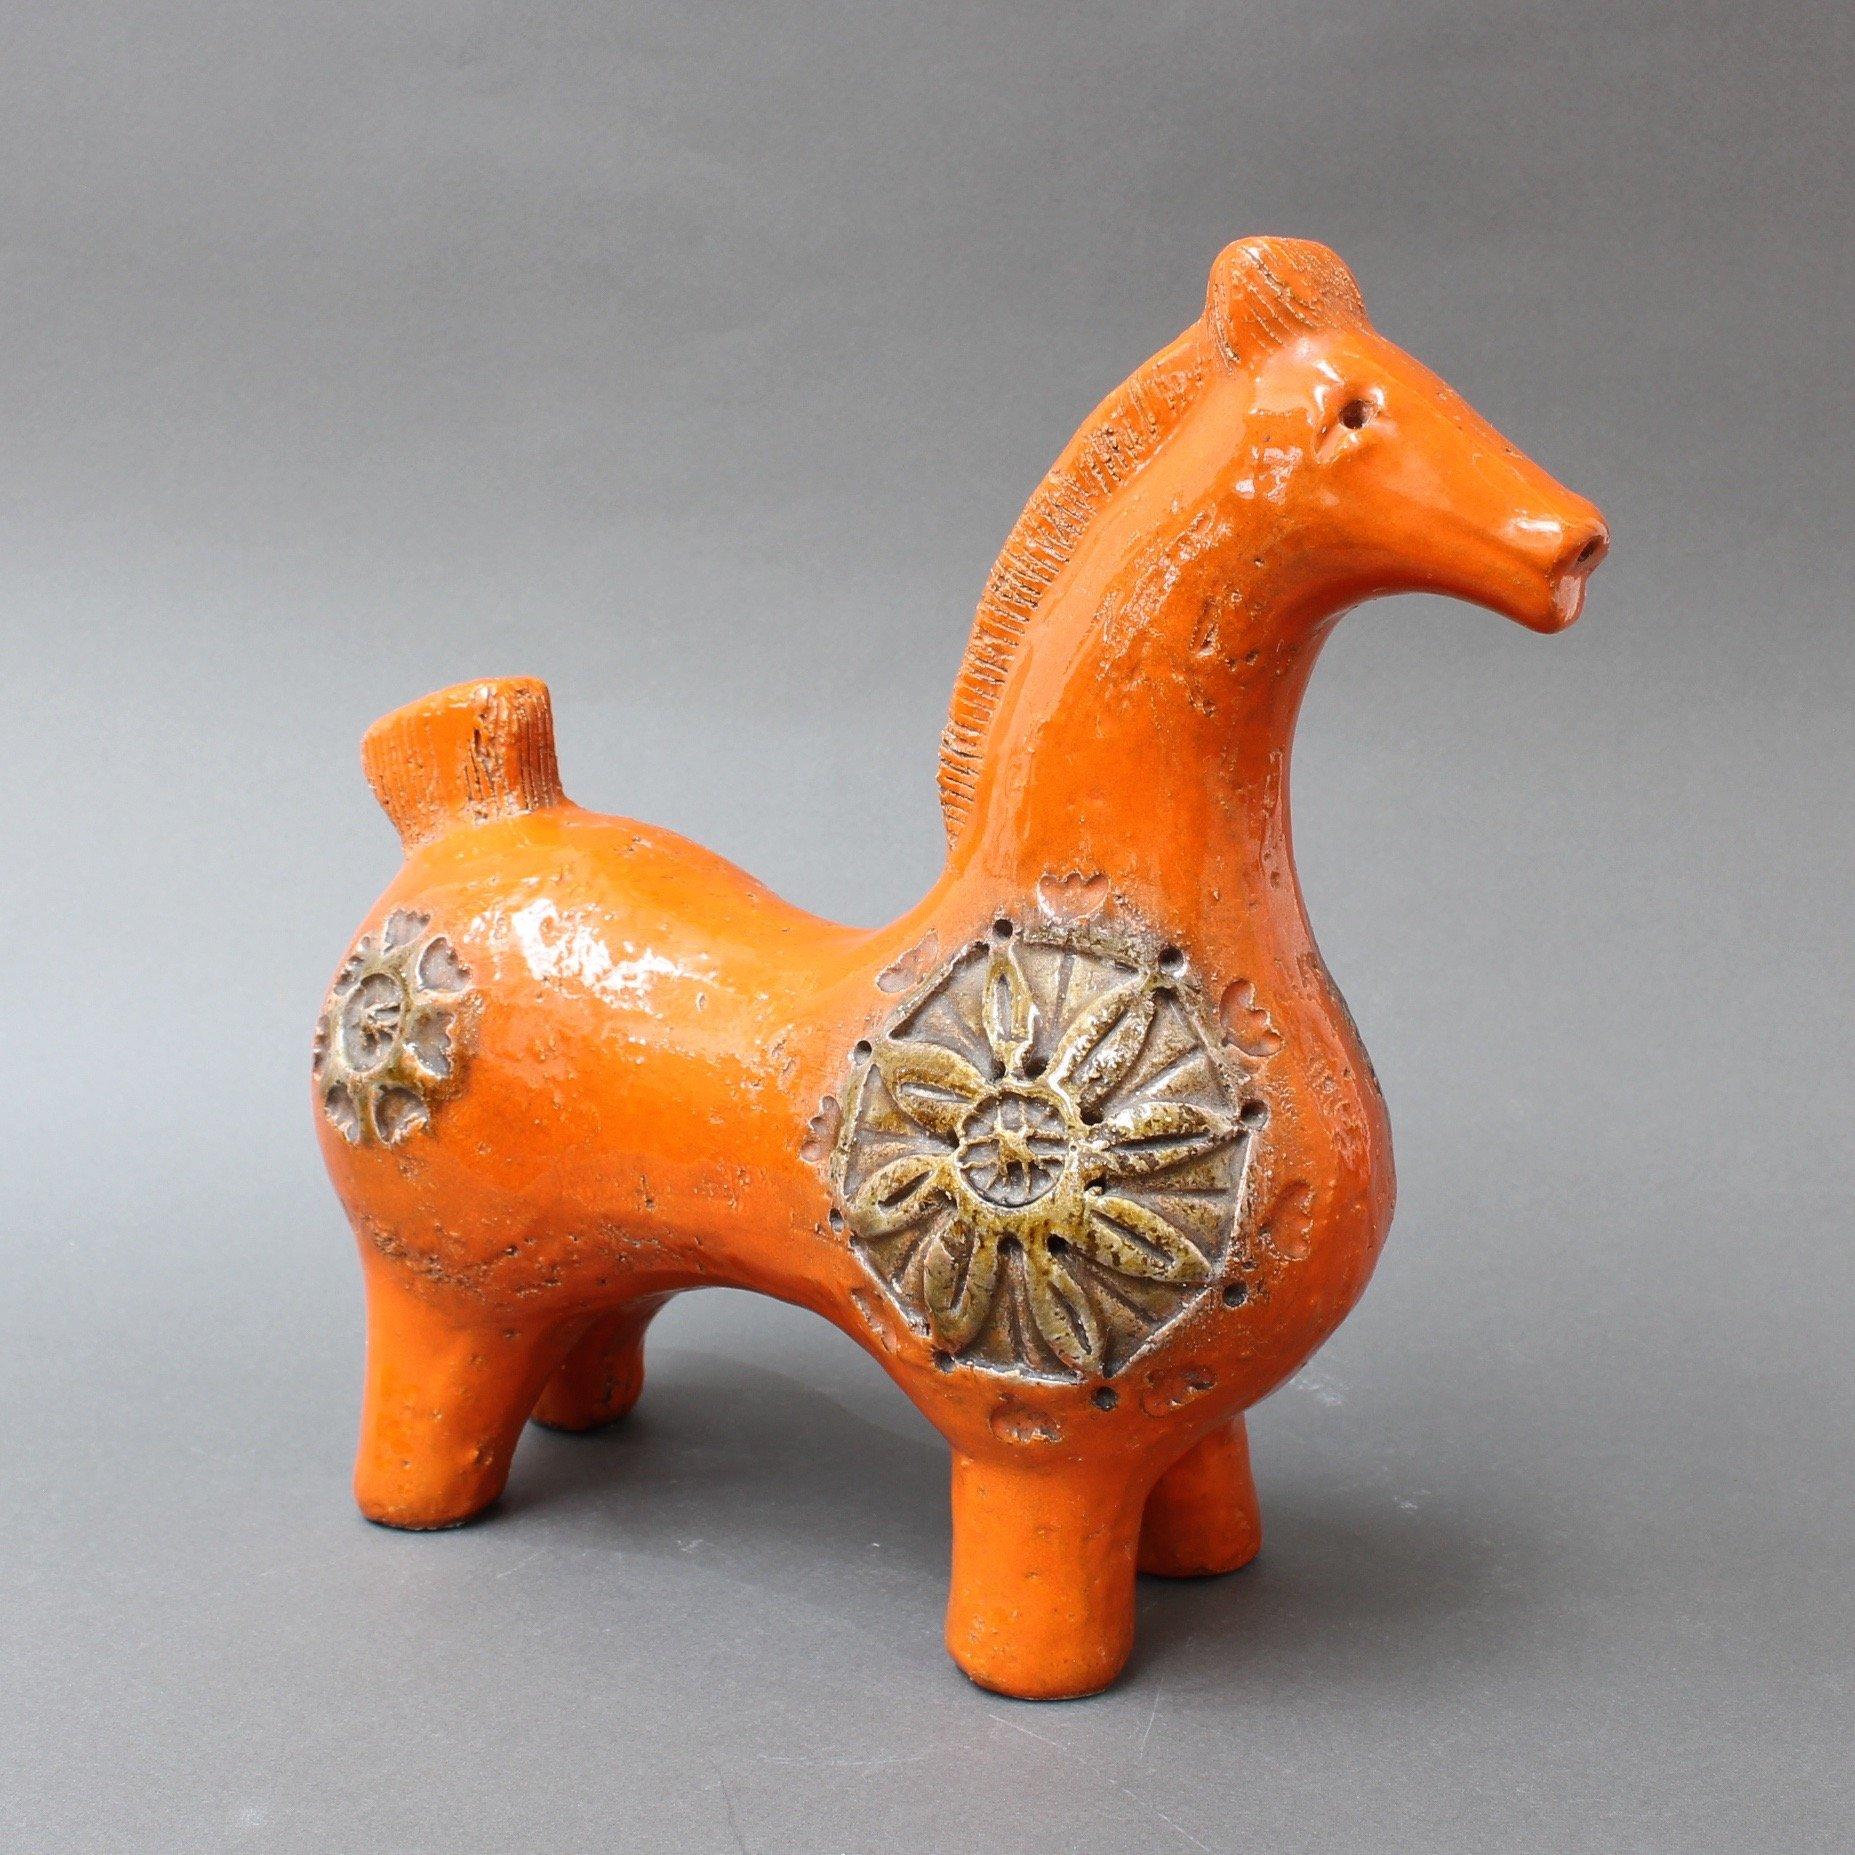 Italian ceramic orange horse by Aldo Londi for Bitossi, circa 1960s. A very iconic vintage design, decorated parade horse with sunflower motifs in 'Hermès orange'. Weighty and substantial, the piece will be a wonderful addition to your home or work